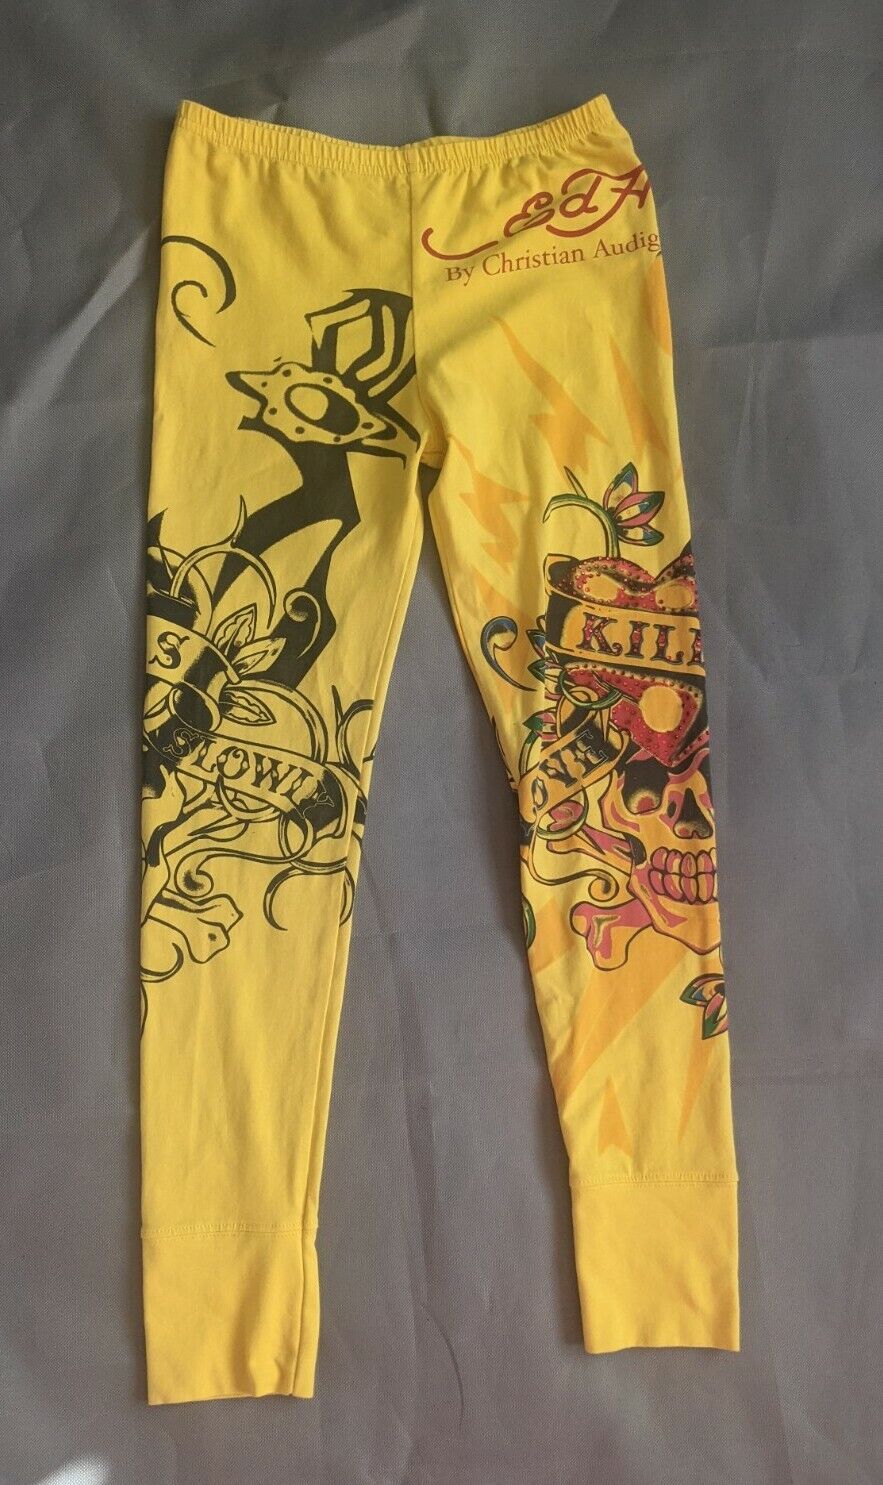 Retro 2021 autumn and winter new Ed Hardy Yellow Leggings Max 80% OFF Christian Cropped? audigier Small